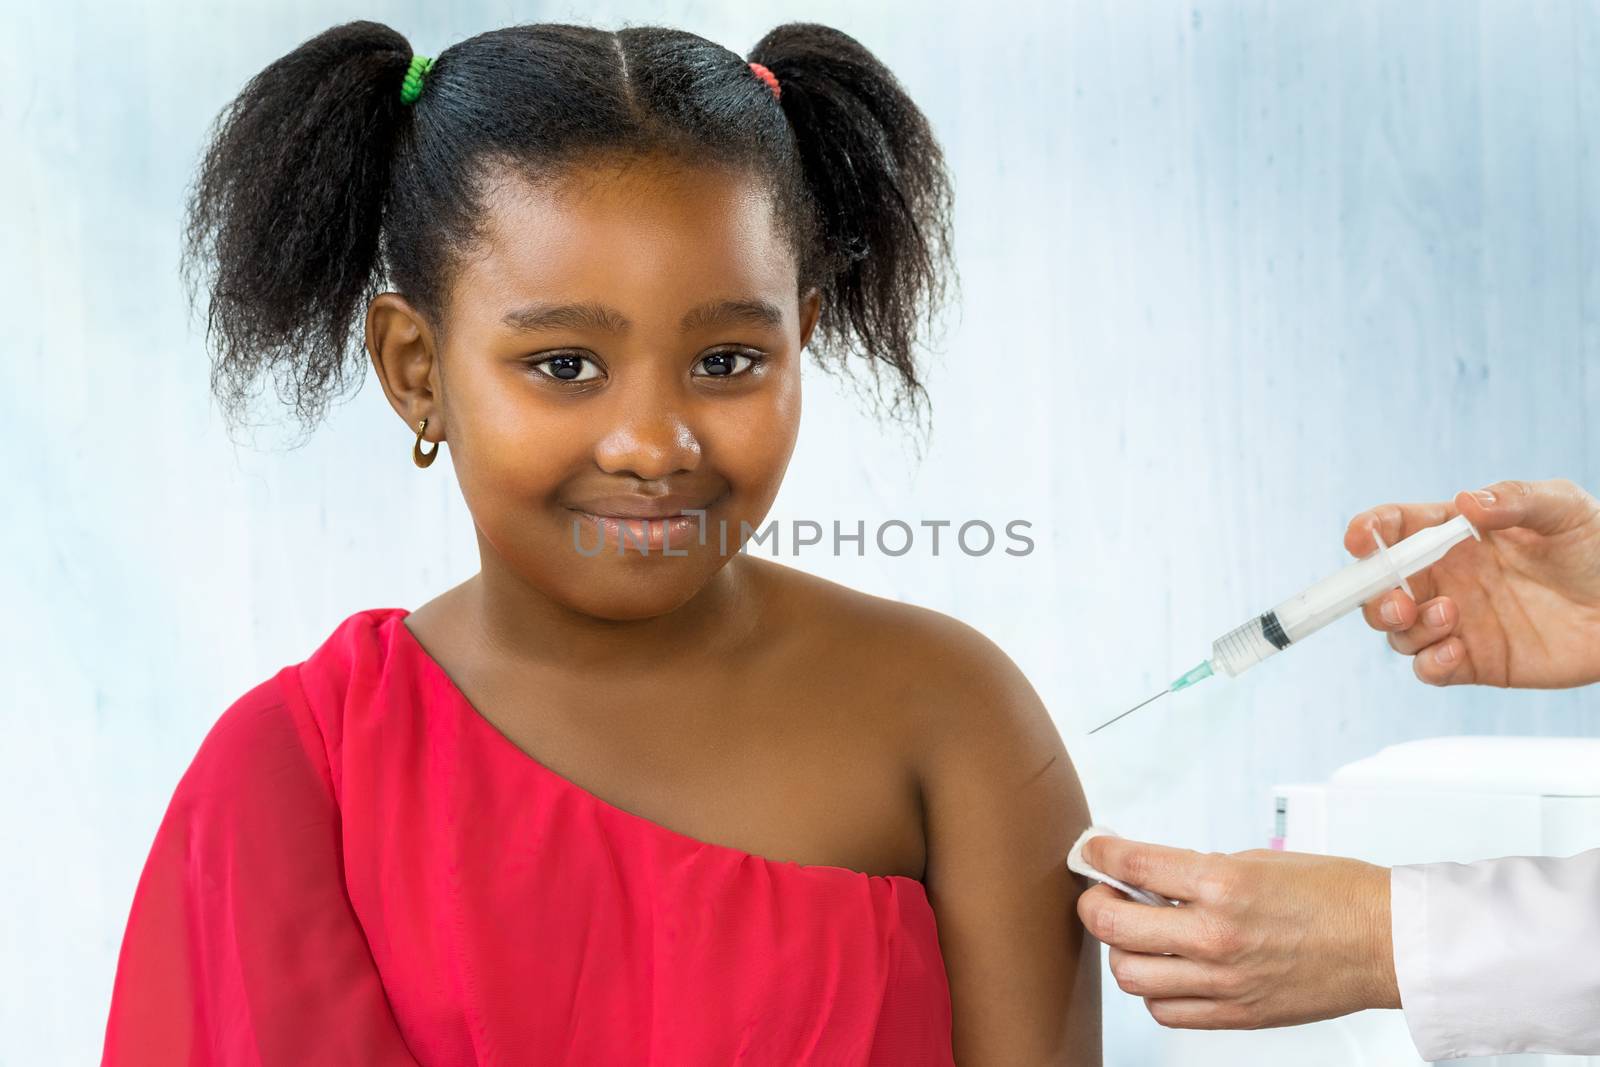 Close up portrait of cute ponytailed african girl receiving disease prevention vaccine.Caucasian hands holding syringe with needle next to upper arm.